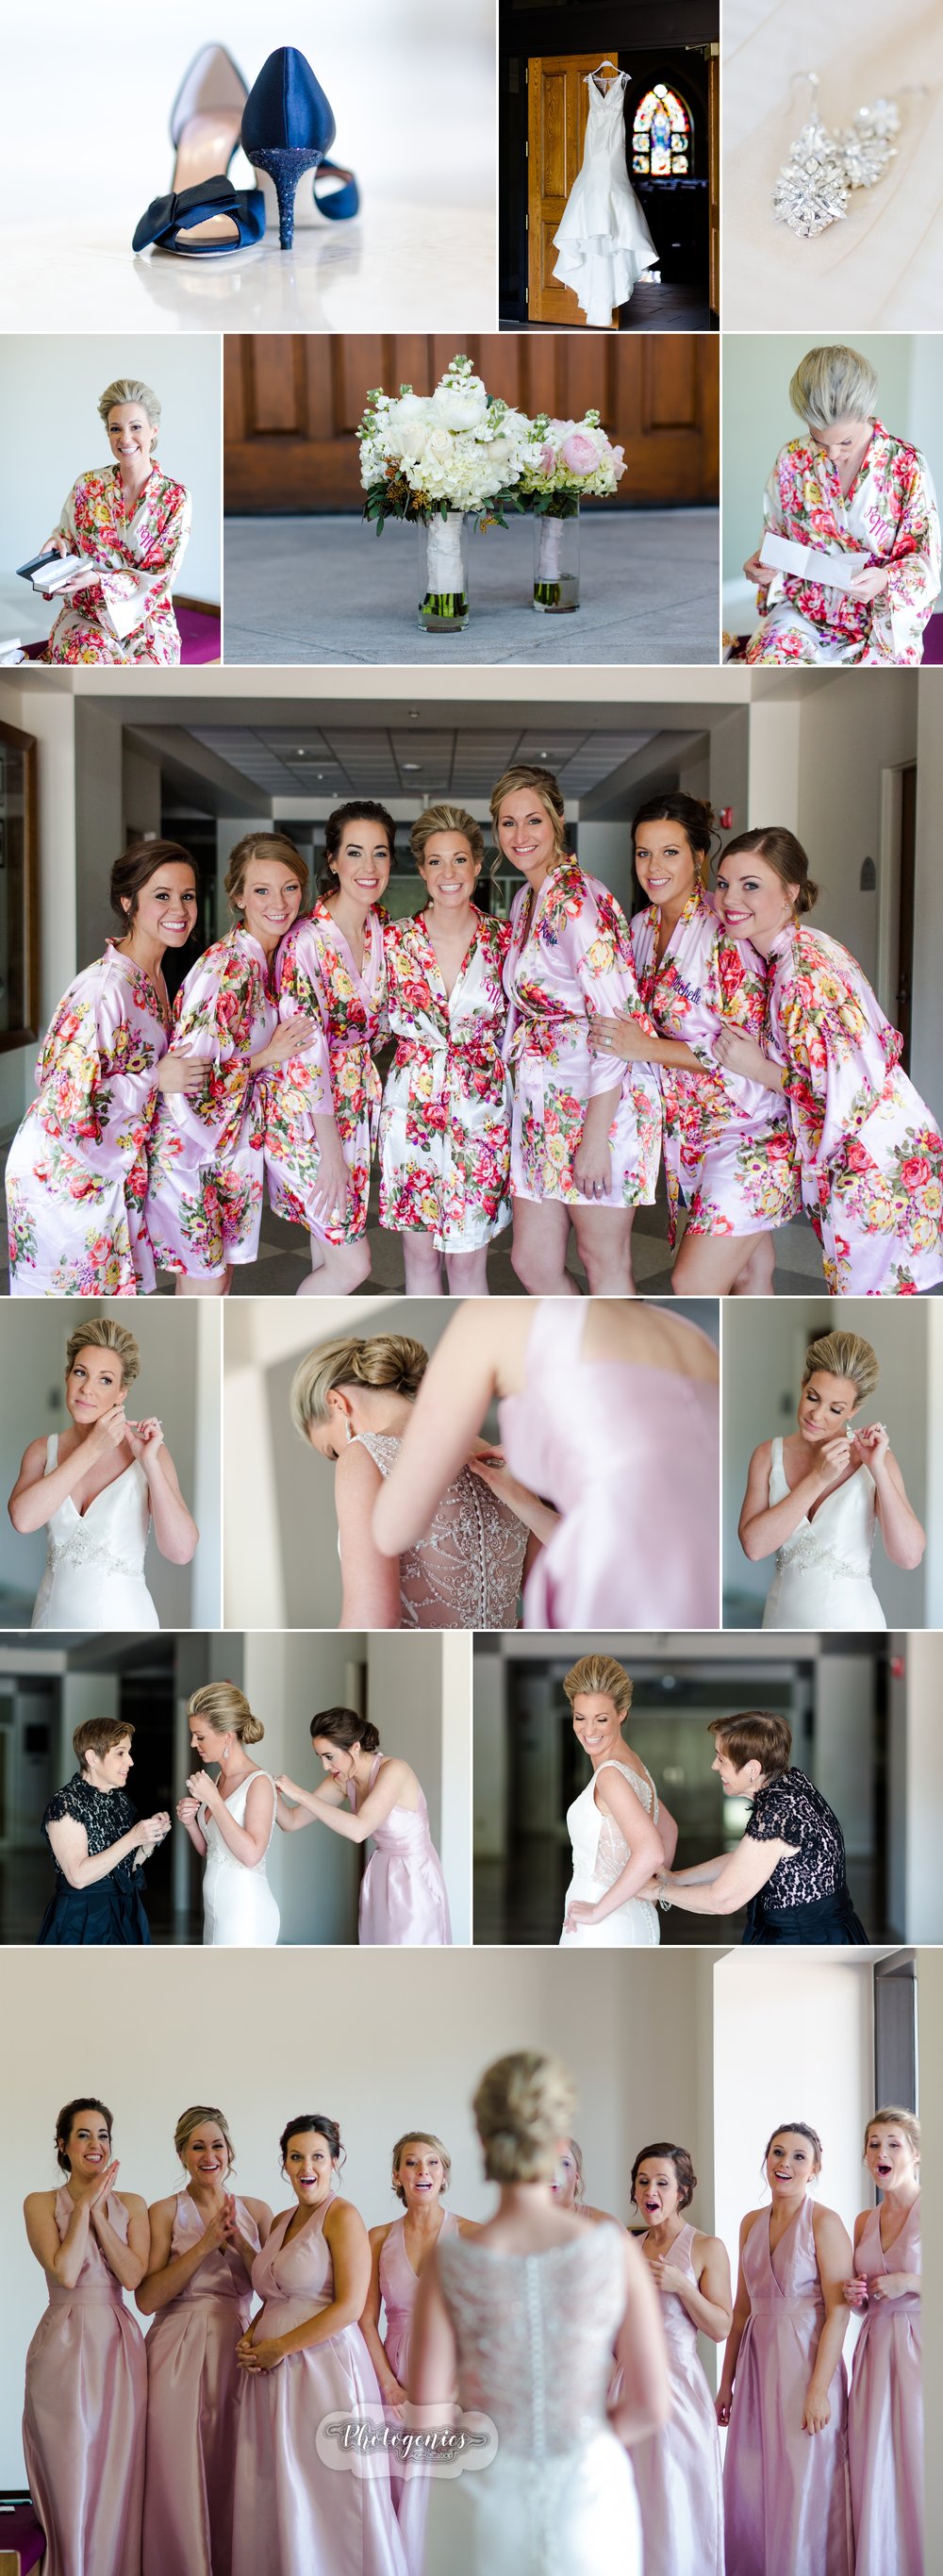  bride_groom_spring_may_wedding_photography_bride_getting_ready_details_must_have_wedding_day_shots 